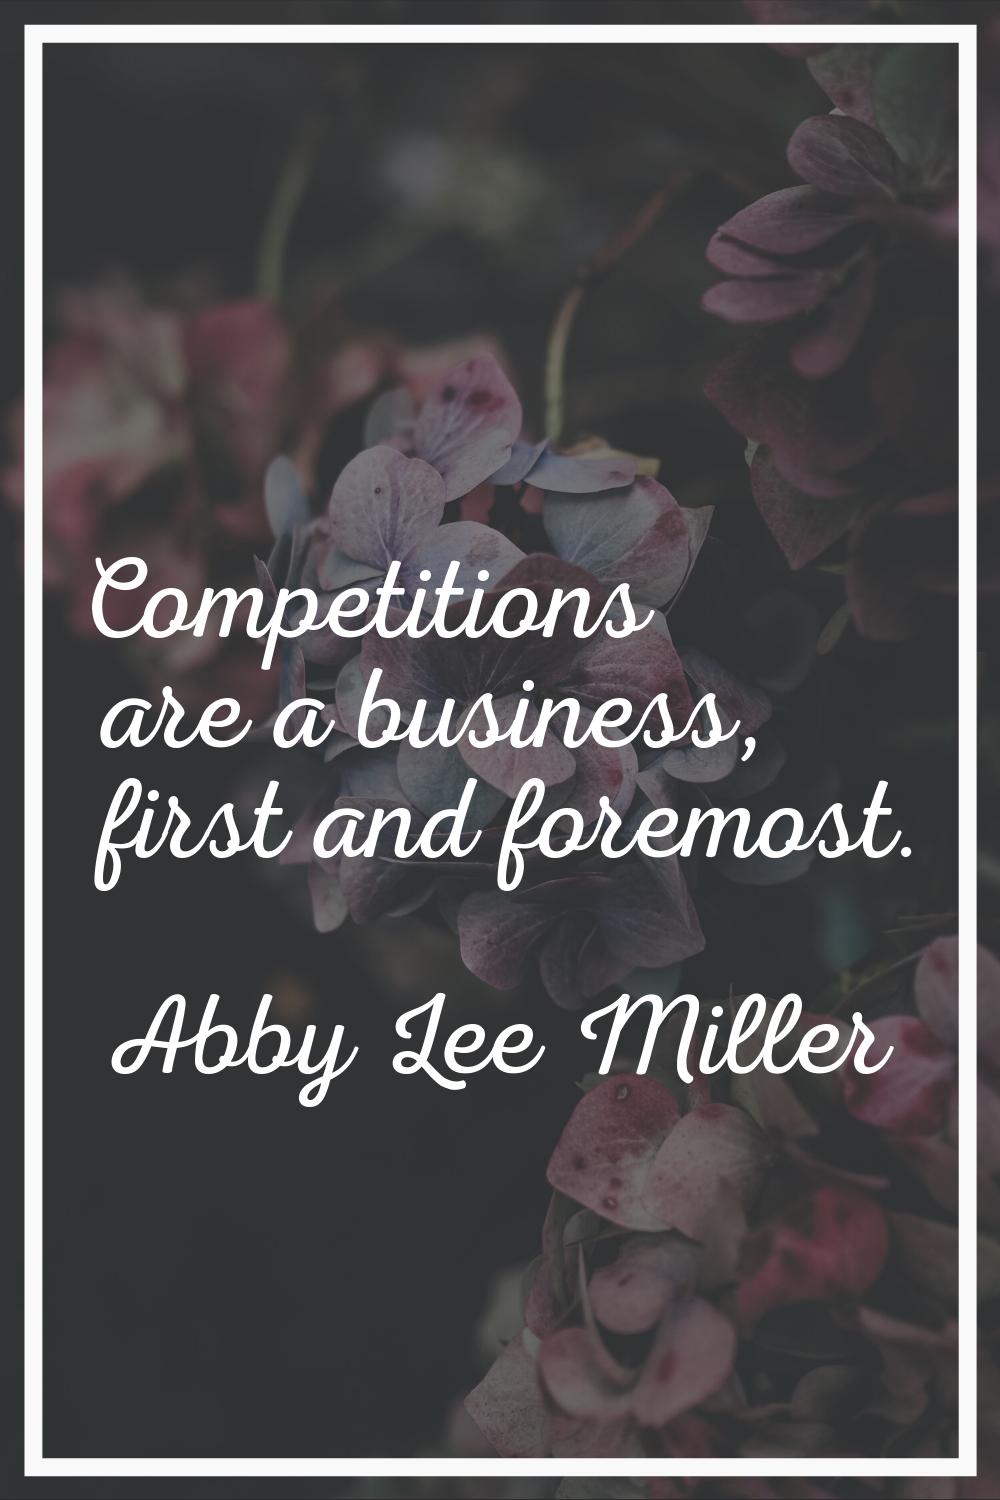 Competitions are a business, first and foremost.